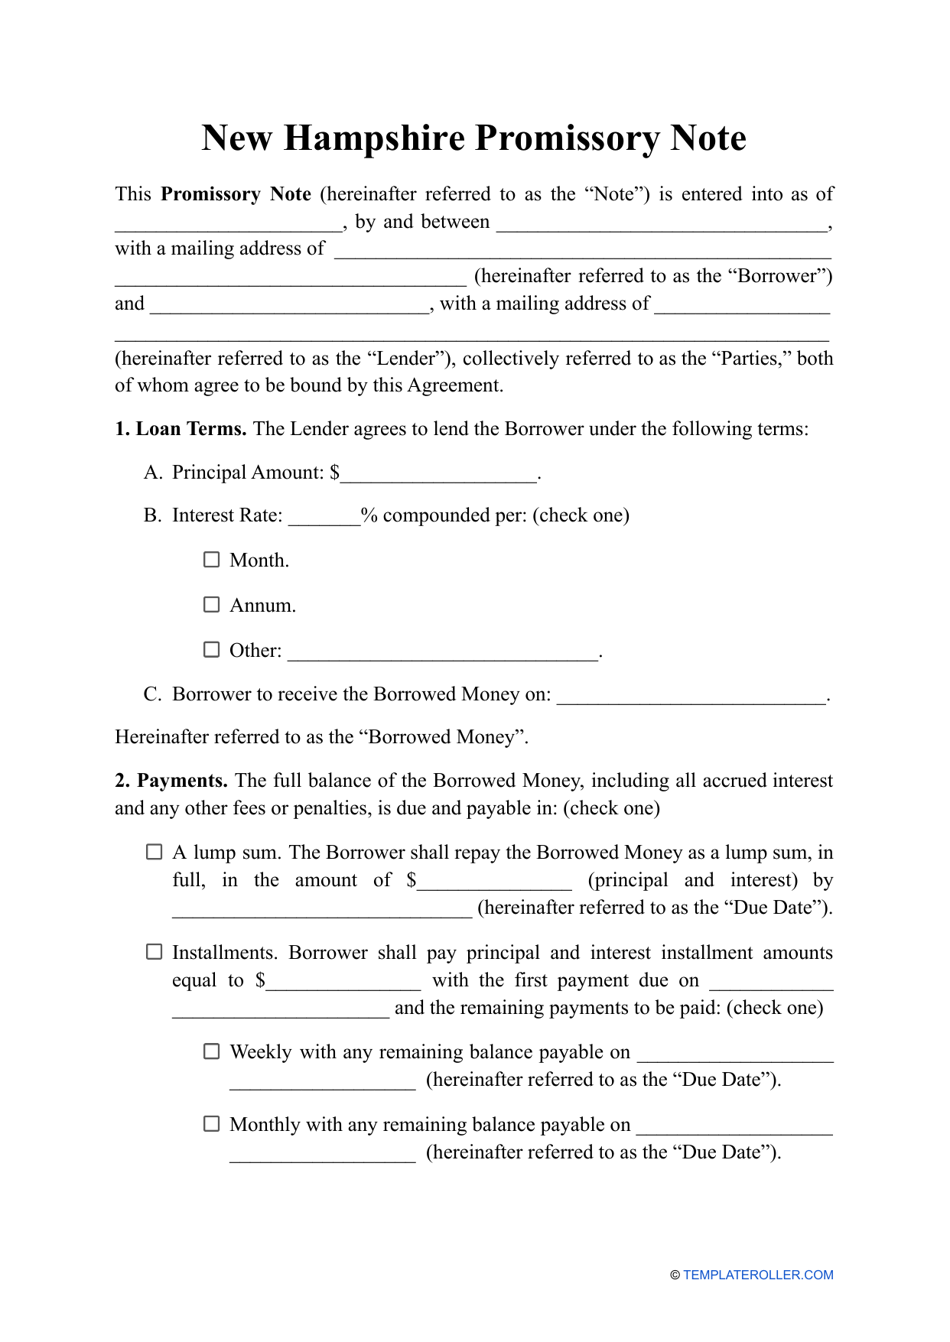 New Hampshire Promissory Note Template